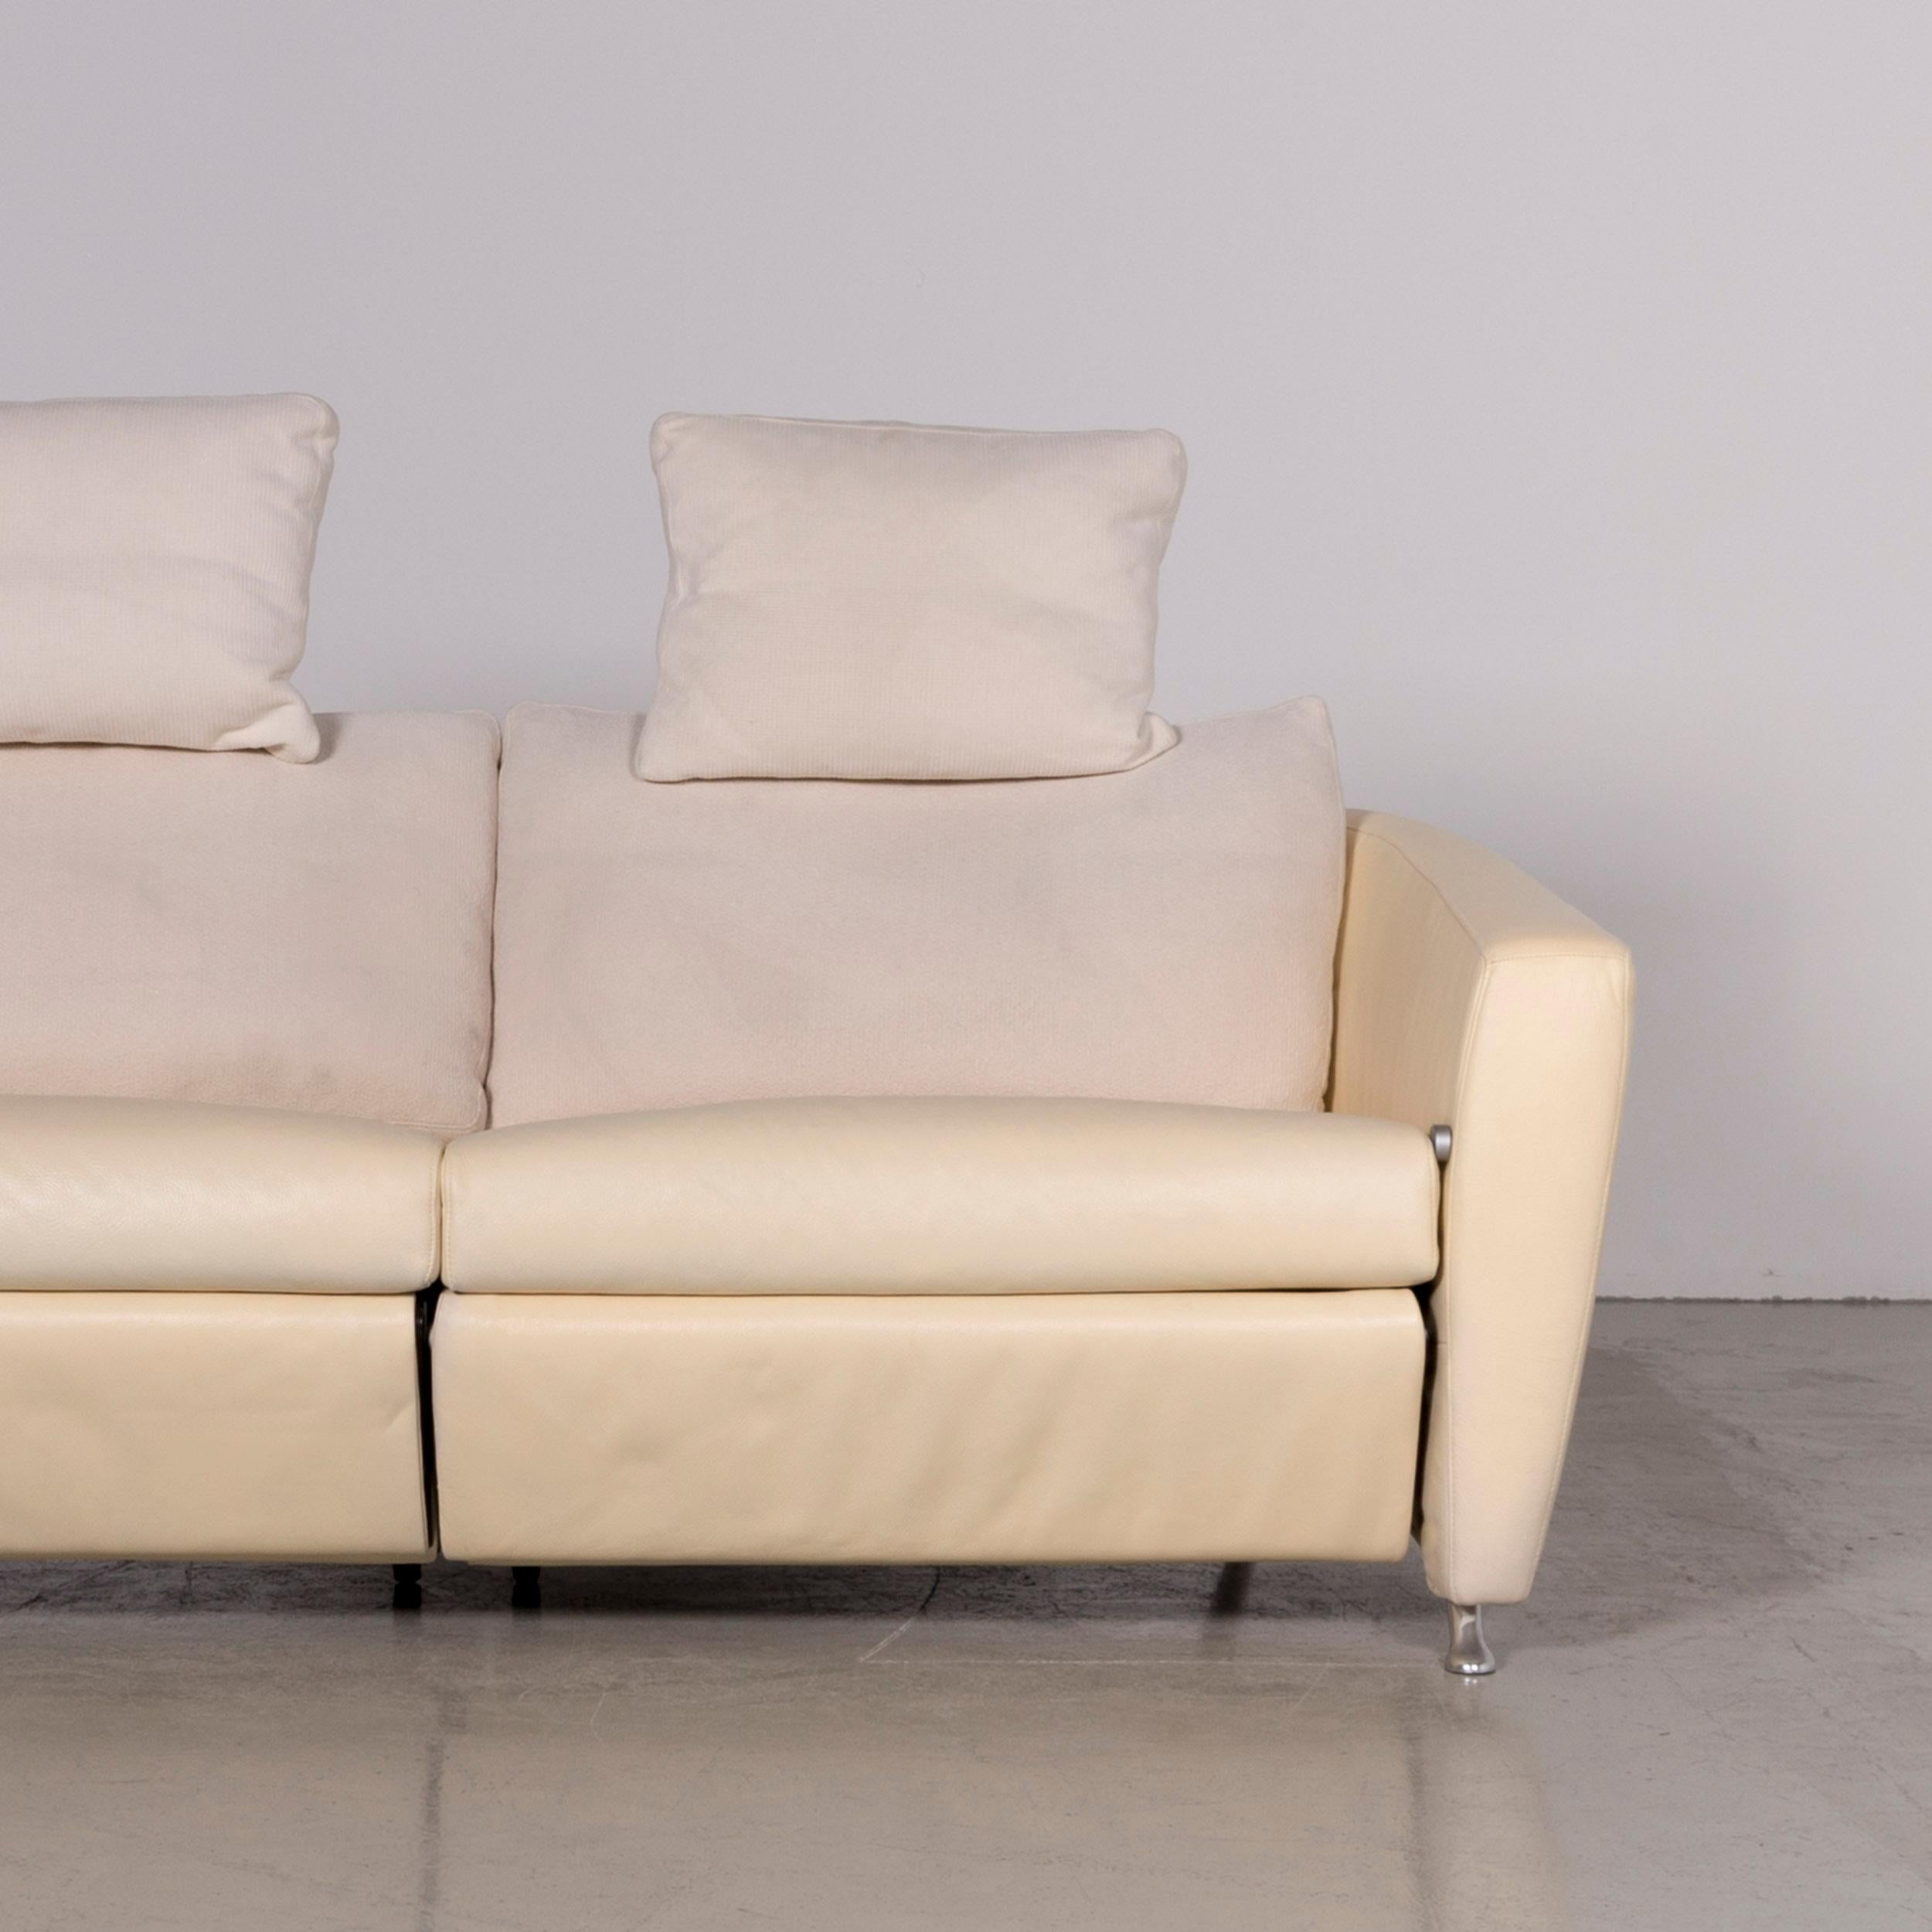 Contemporary FSM Sesam Leather Sofa Off-White Two-Seat Function For Sale